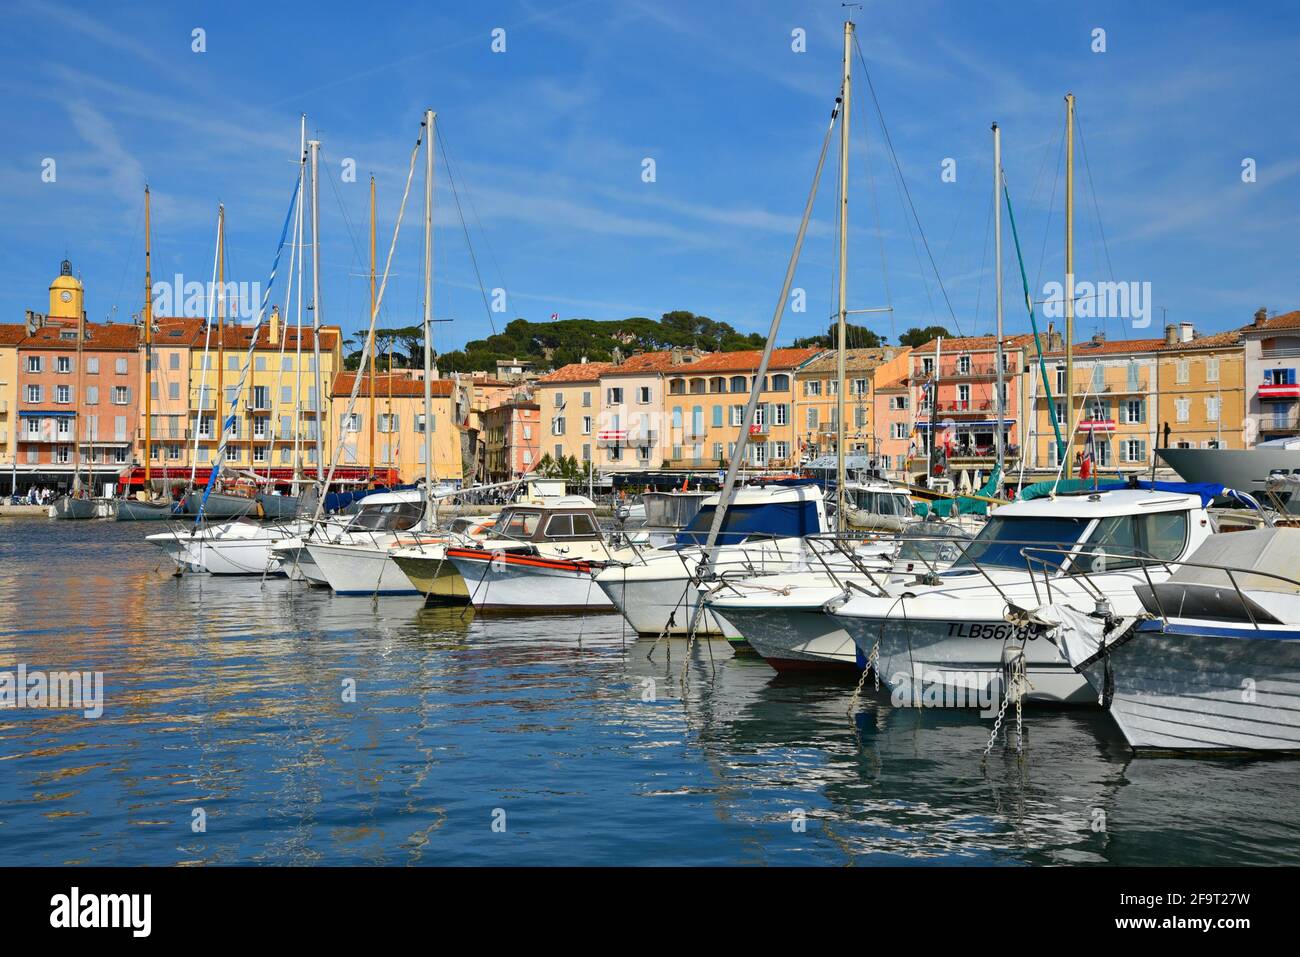 Scenic view of the Old Port with the typical Provençal architecture and ...